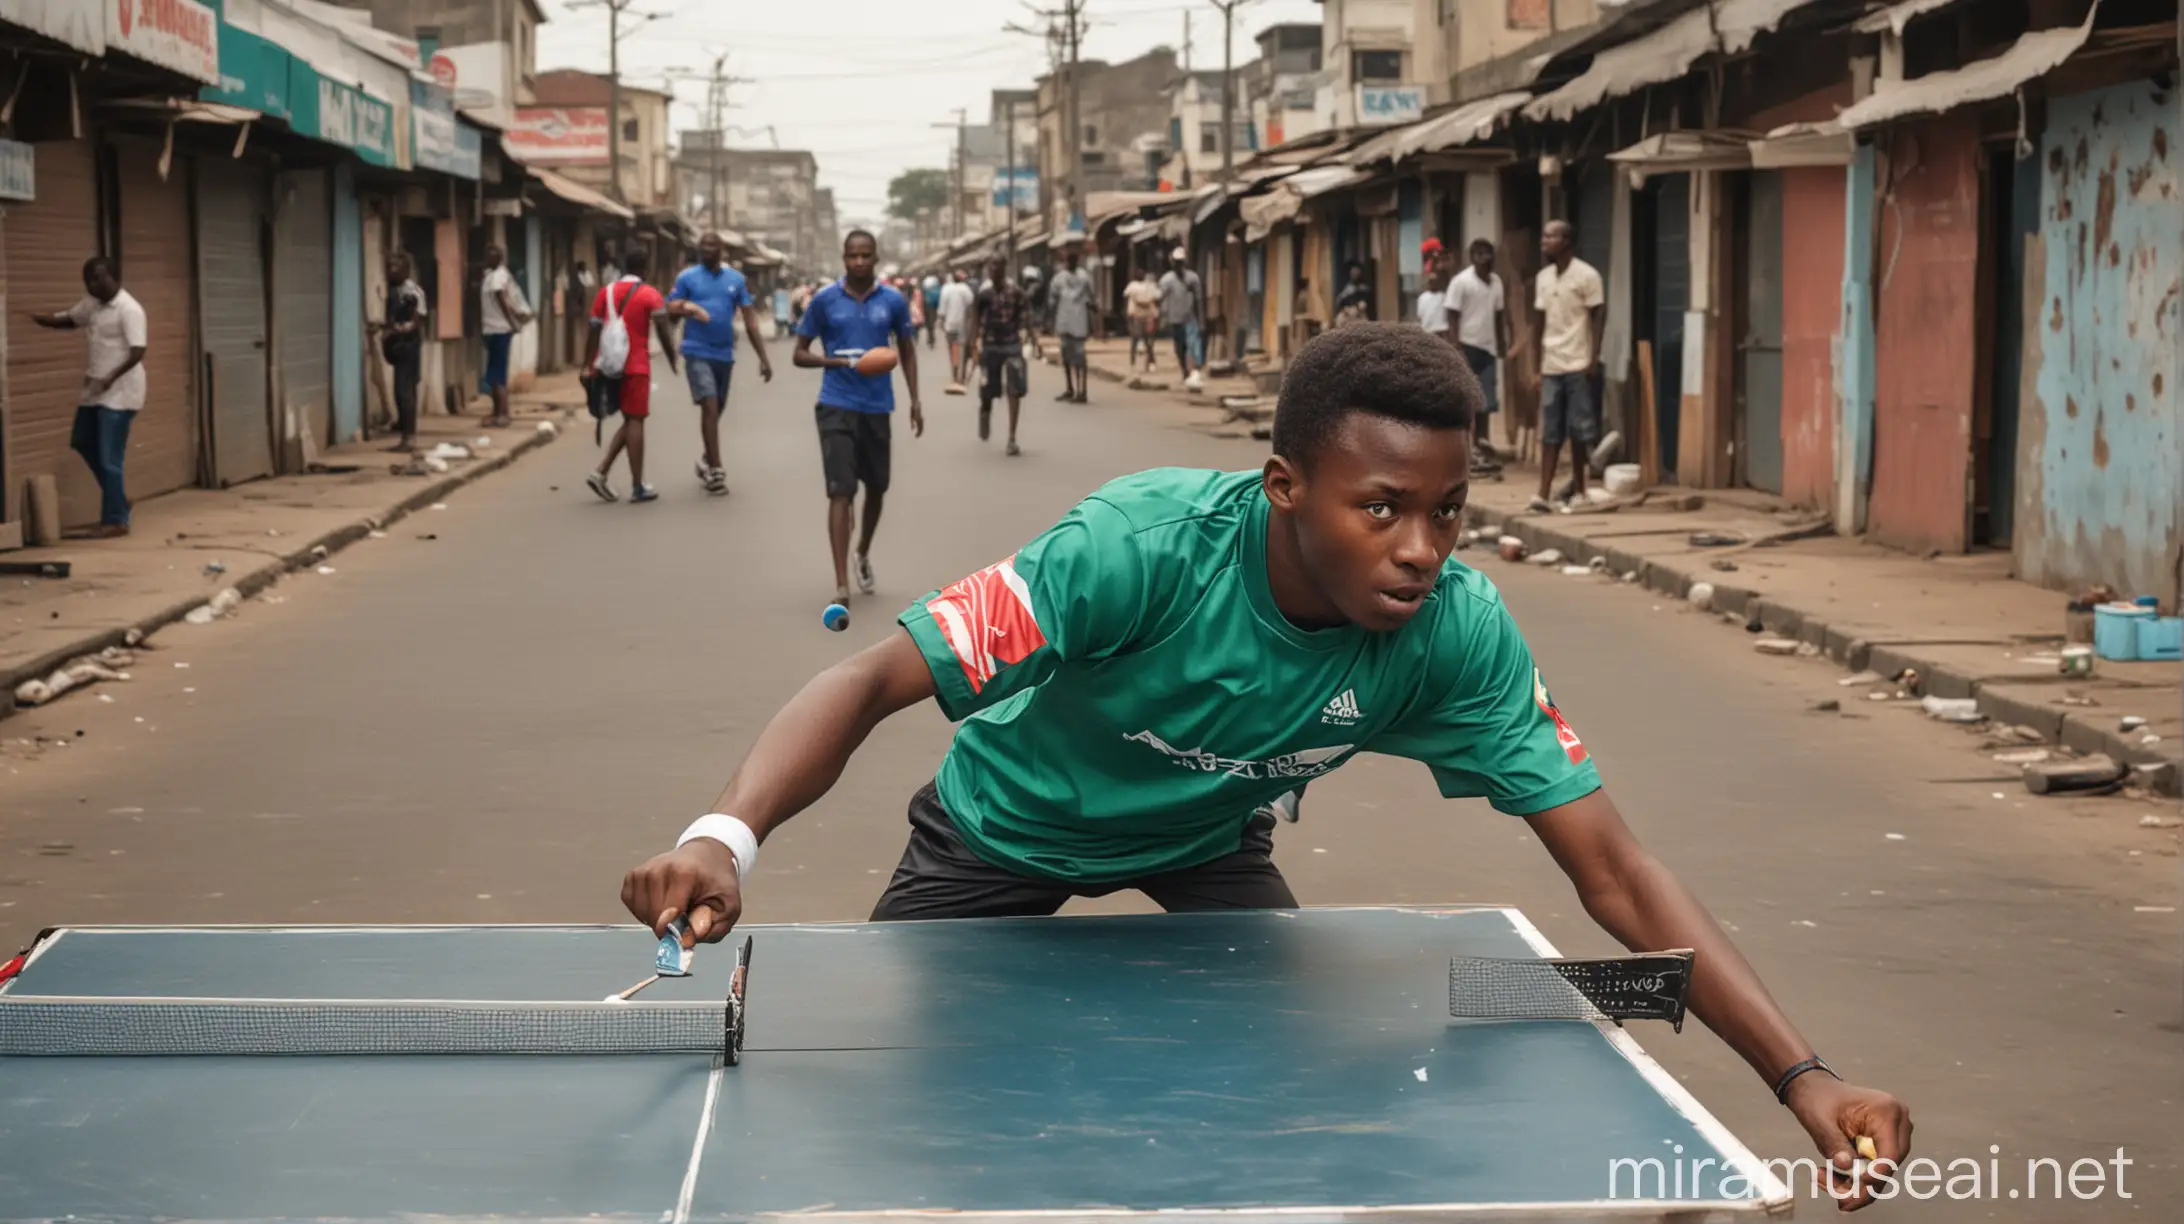 Determined Young Table Tennis Player in Lagos